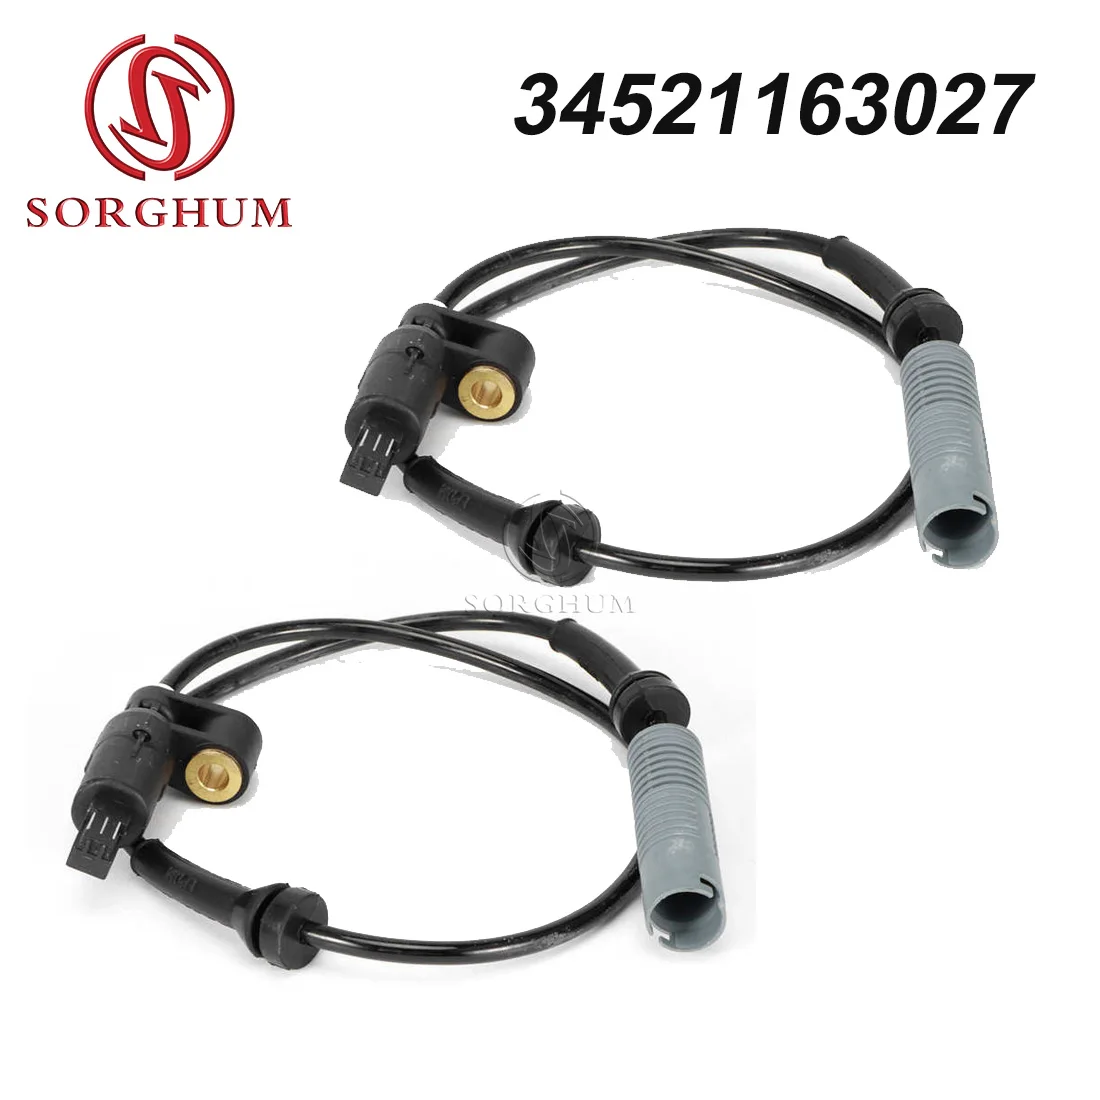 

SORGHUM 2PCS NEW FOR BMW 318 323 325 328 M3 Front Left Right ABS SPEED SENSOR E36 99 OEM 34521163027